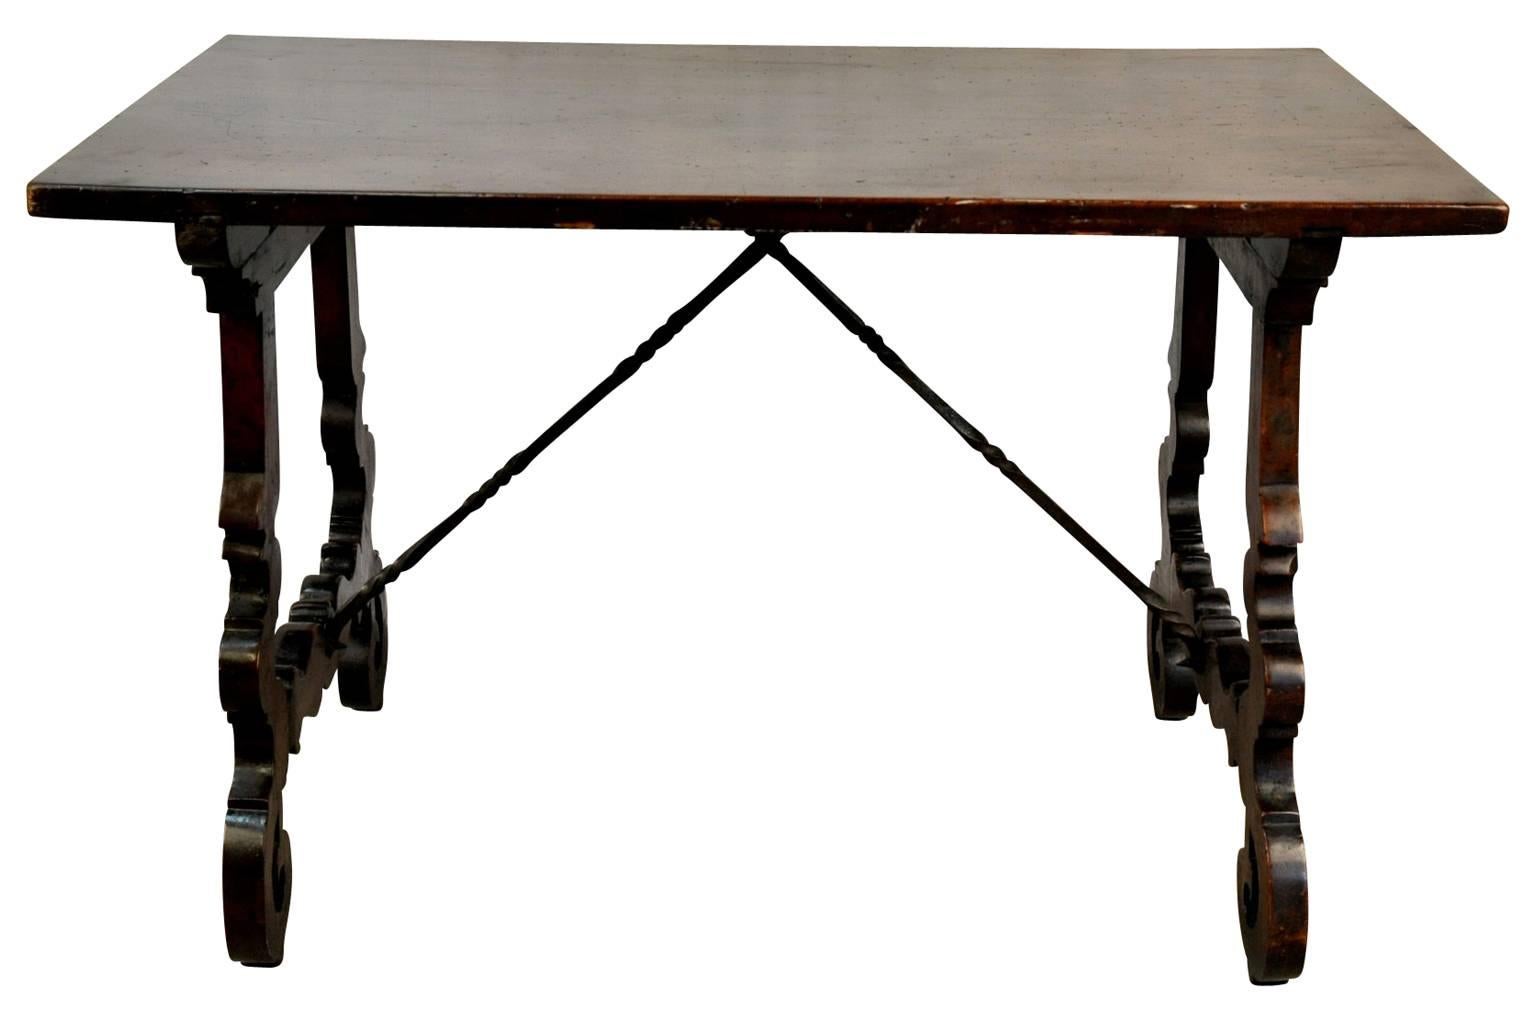 A stunning 18th century Spanish table, side table from the Catalan region of Spain. Beautifully constructed from walnut with a wonderful solid board top, classical lyre shaped legs and hand-forged iron stretchers. A magnificent piece whether used as